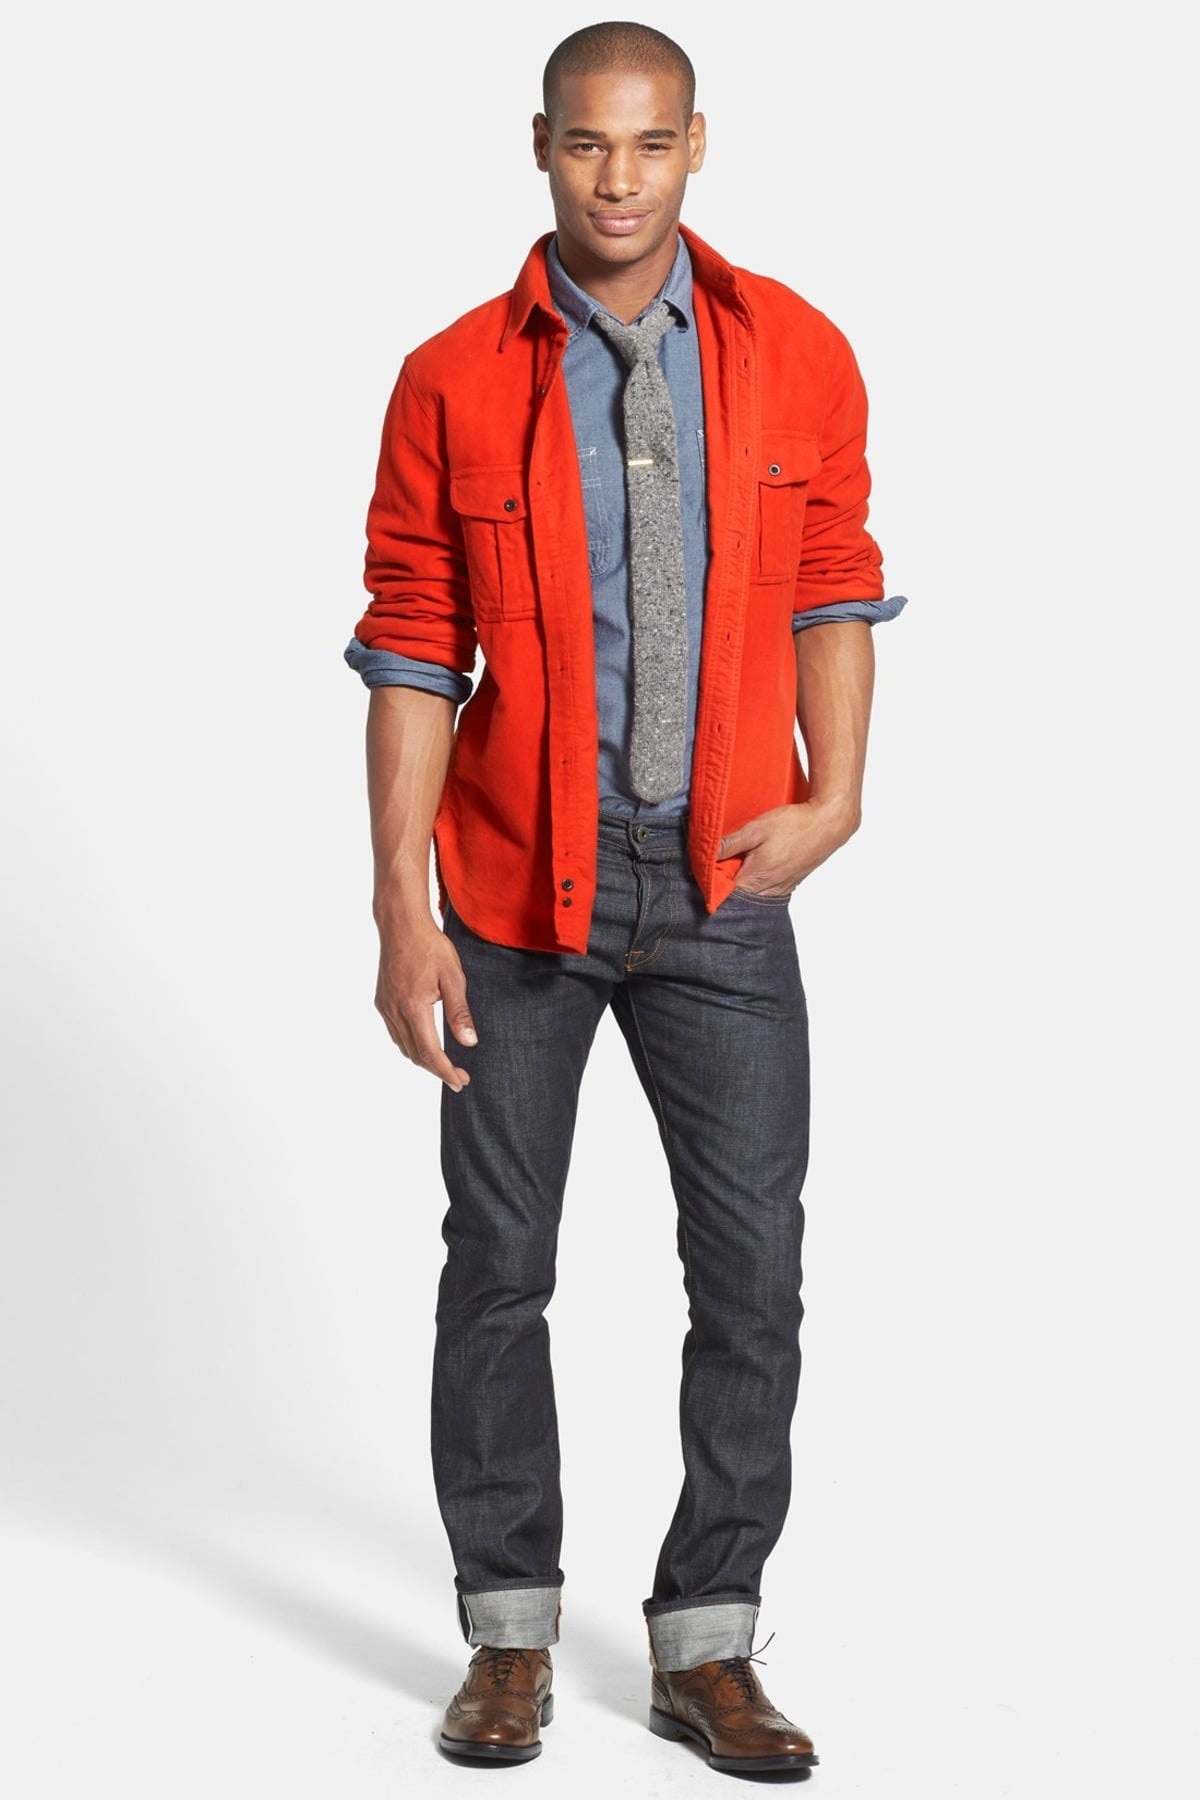 The Style Essentials You Need Men, trendy shirt, men's chambray shirt with orange shirt layered on top and jeans